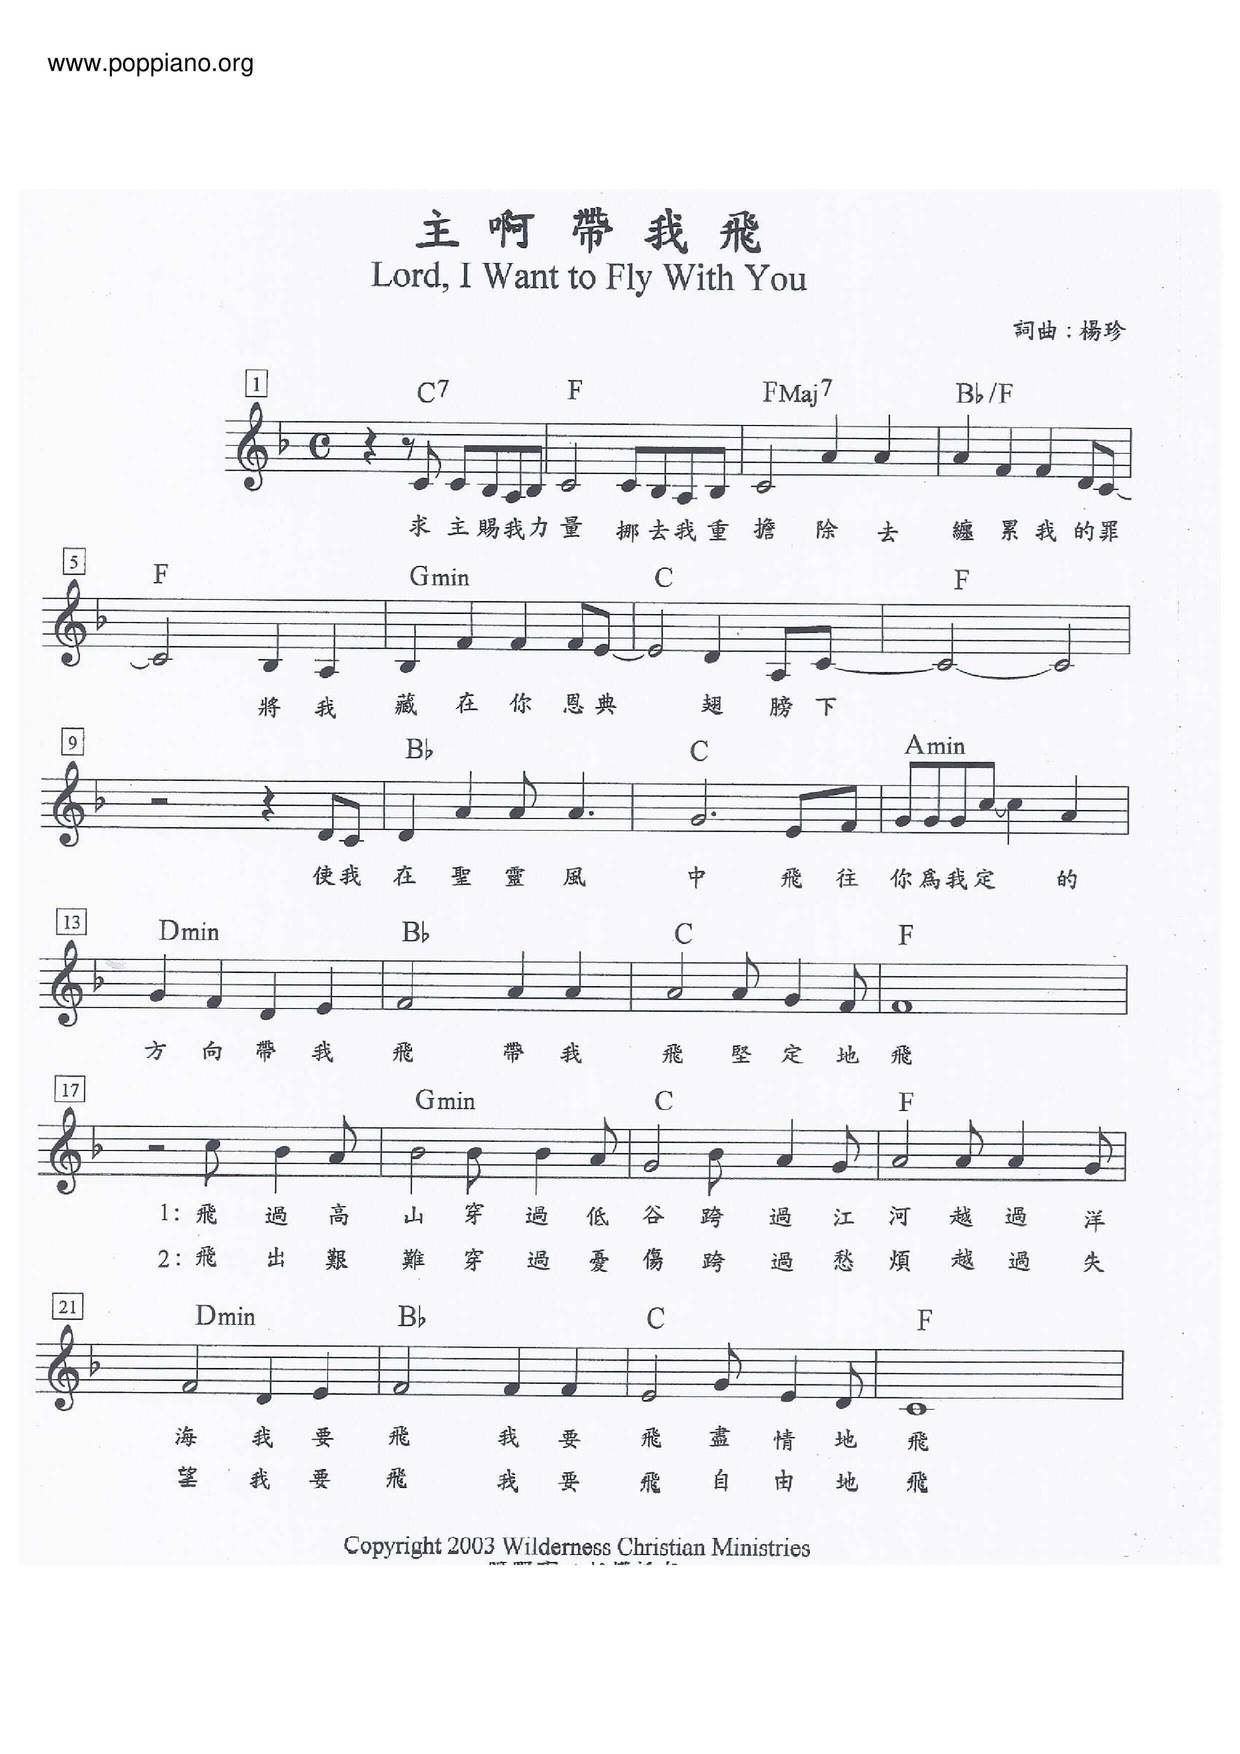 Lord, I Want To Fly With You Score